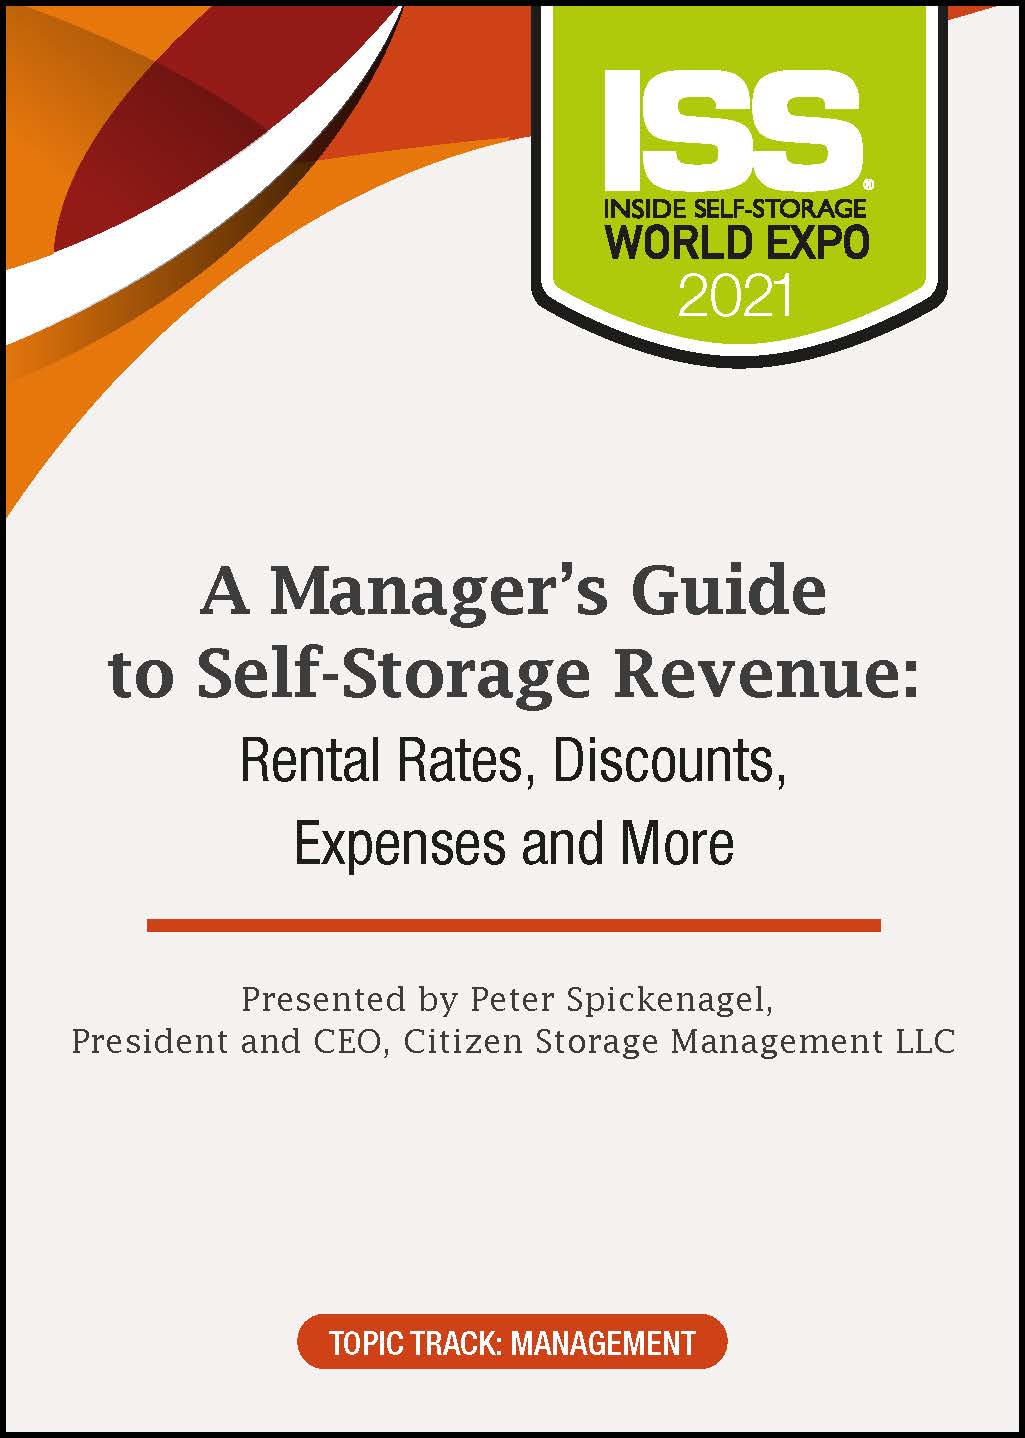 A Manager's Guide to Self-Storage Revenue: Rental Rates, Discounts, Expenses and More